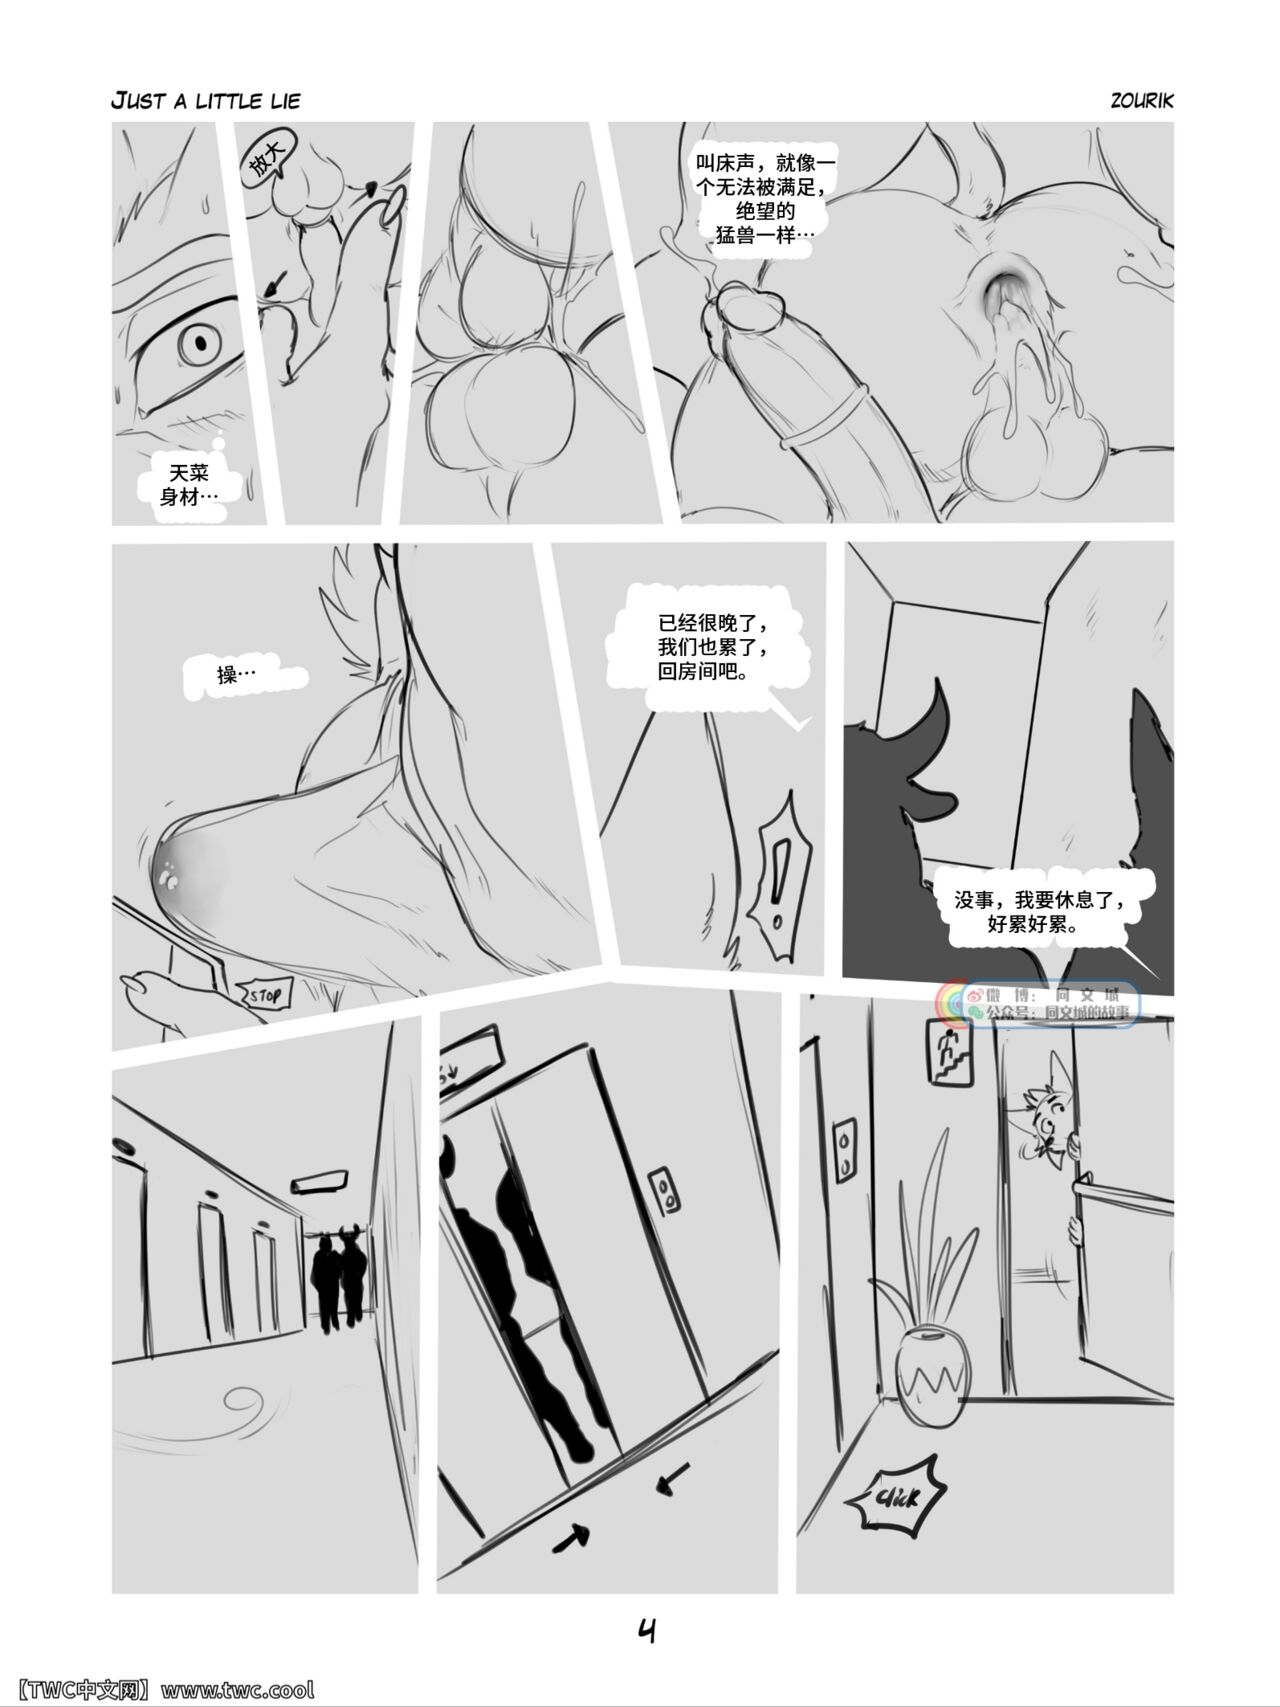 [Zourik]Just a Litle LIE (ONGOING) [Chinese] [同文城] [Digital] [Zourik]Just a Litle LIE (ONGOING) [Chinese] [同文城] [Digital]